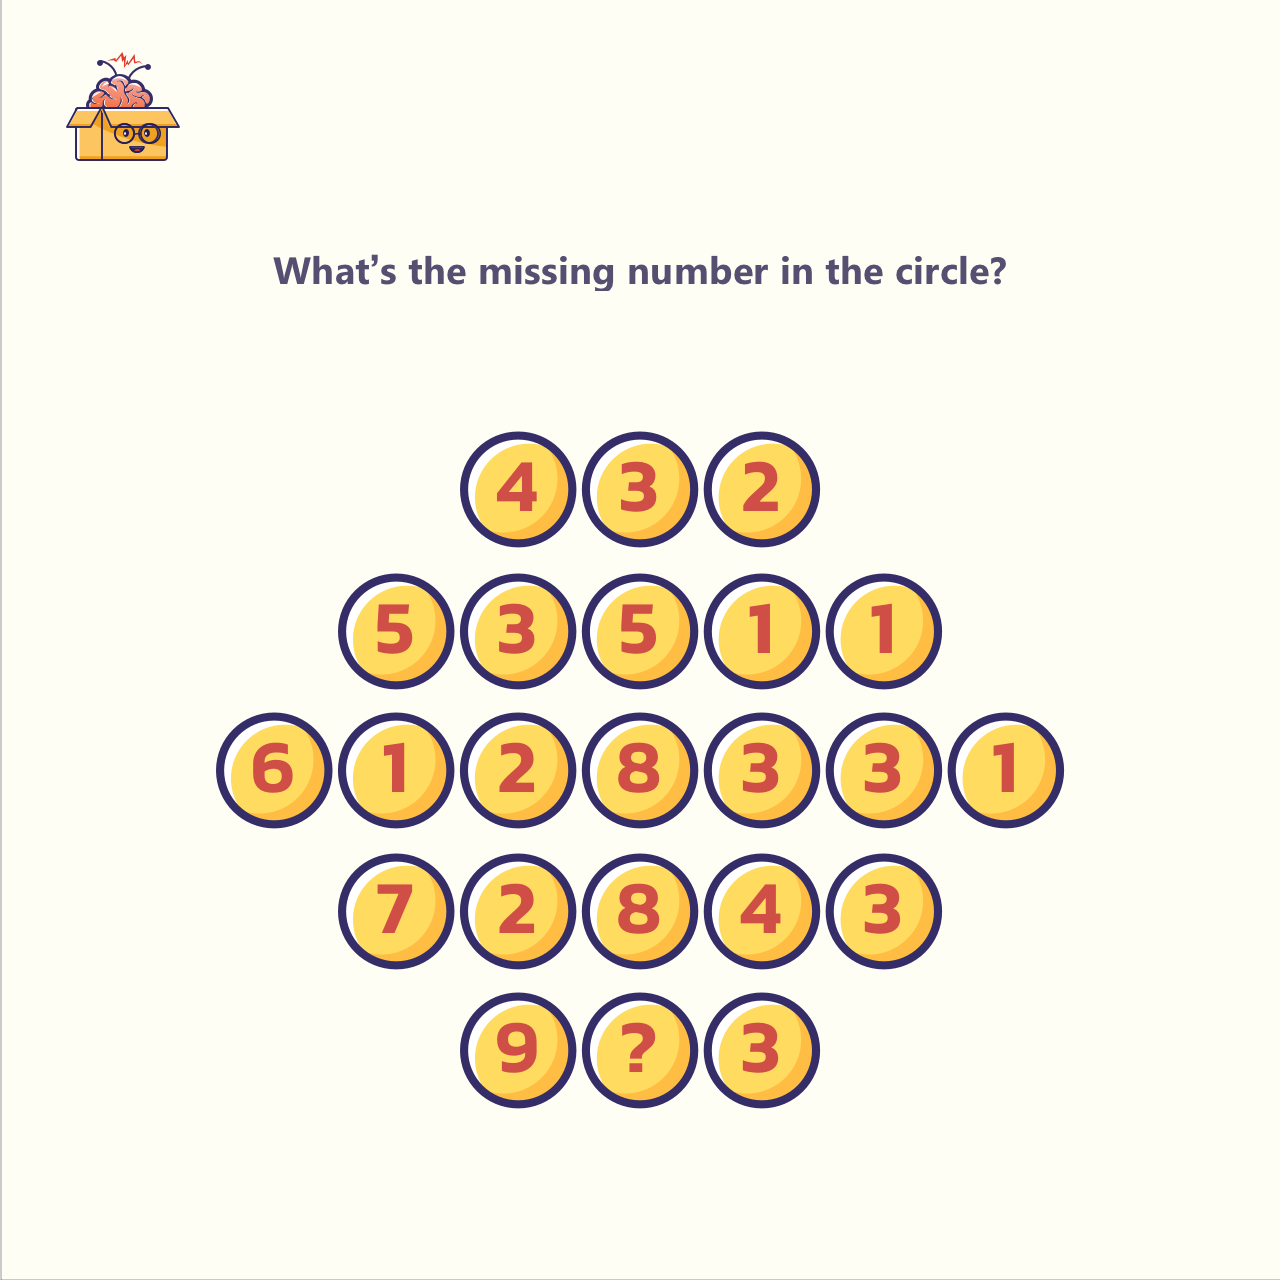 visual brain teasers for kids